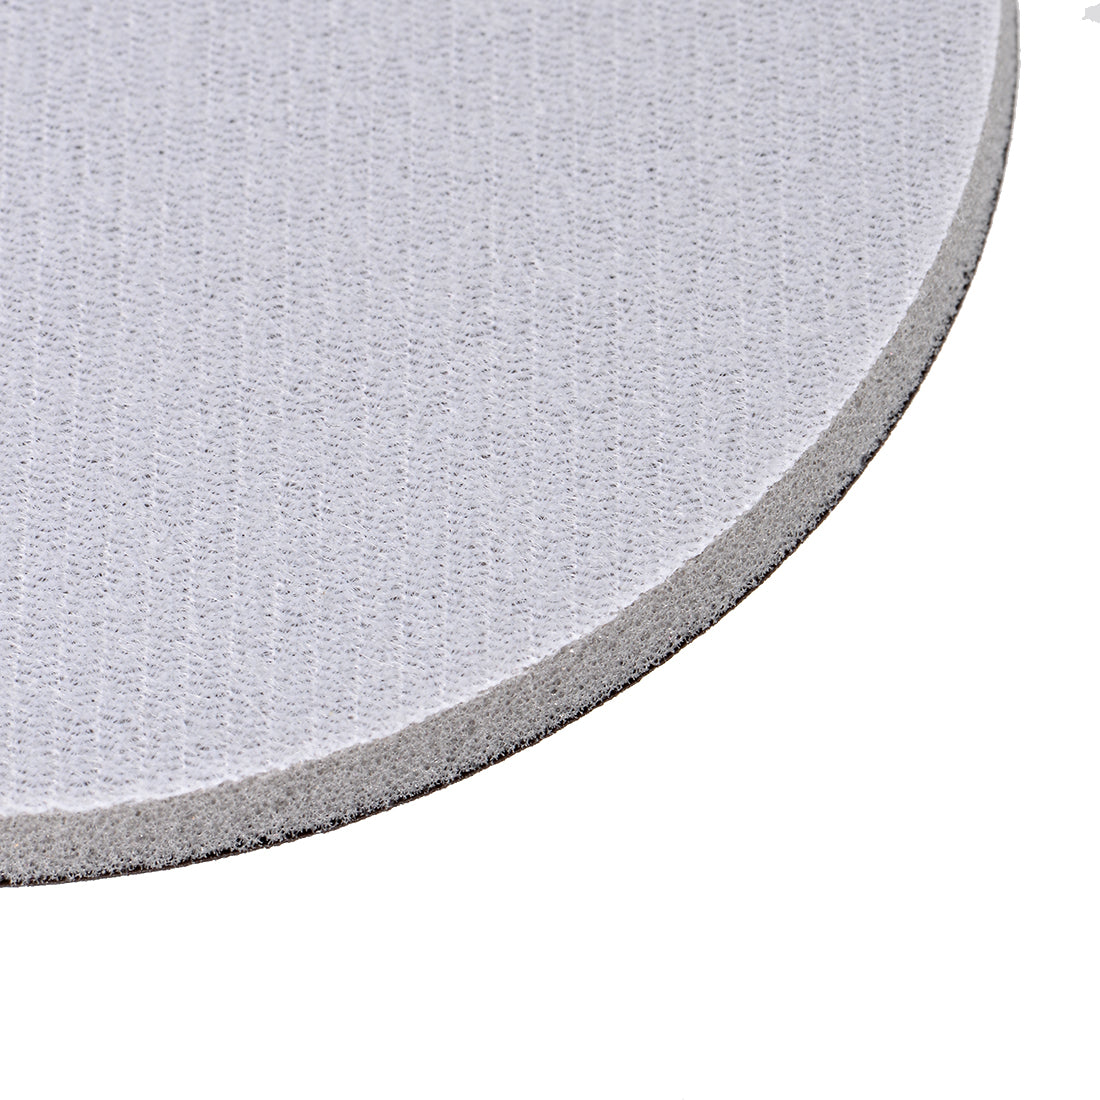 uxcell Uxcell 1.5-Inch 600-Grits Hook and Loop Sanding Disc, Sponge Sanding Pad Wet Dry Aluminum Oxide Sandpaper for Polishing & Grinding 10pcs